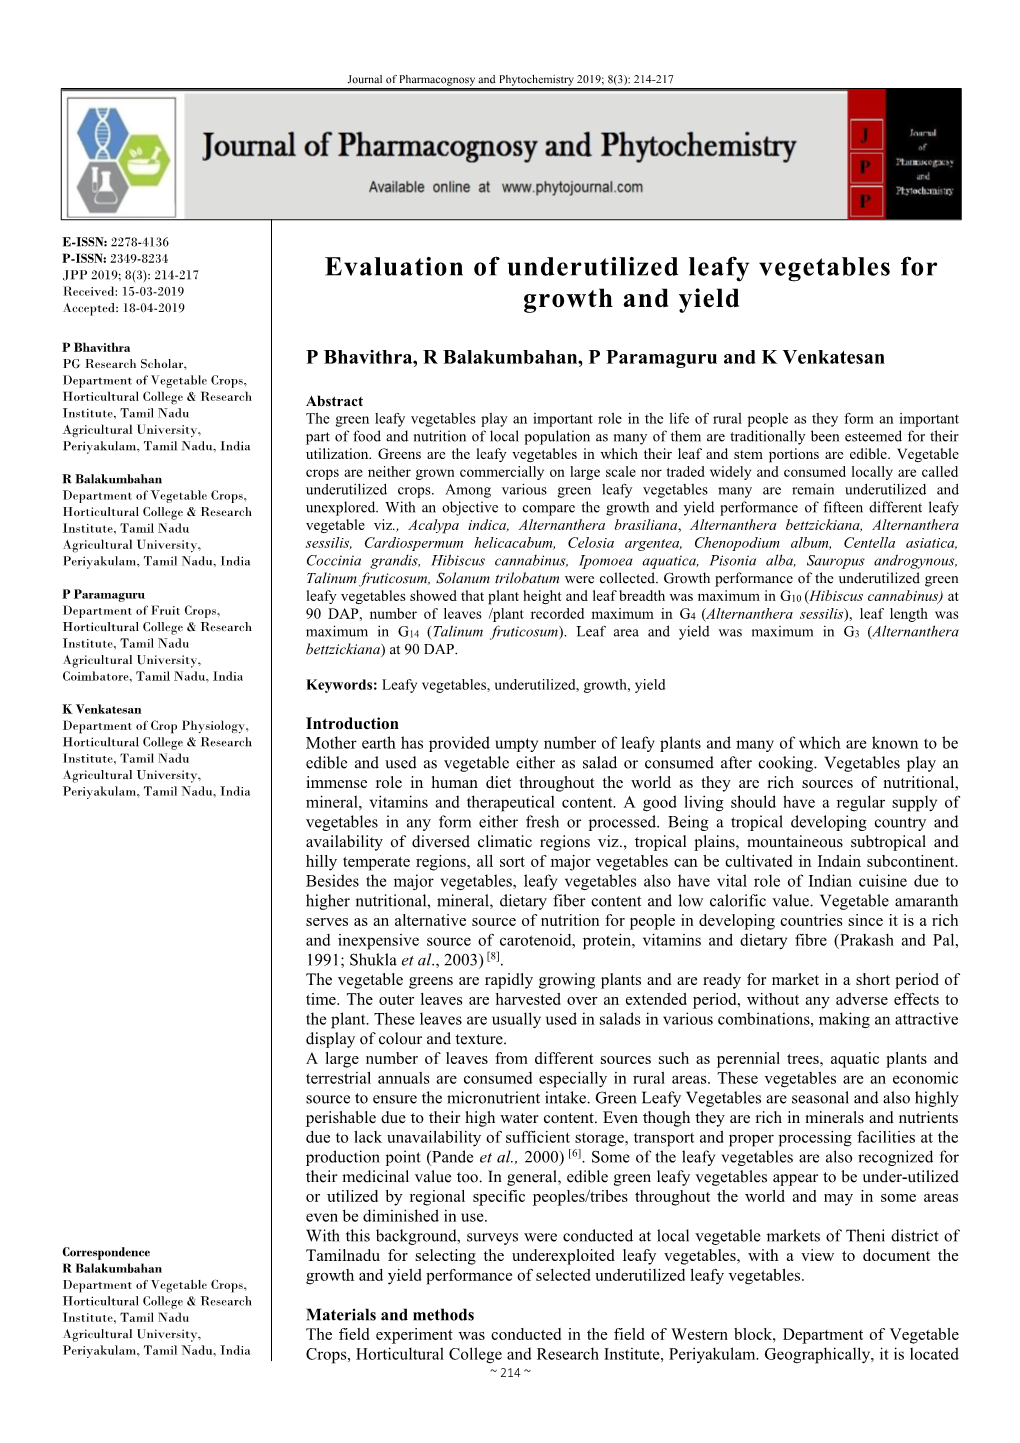 Evaluation of Underutilized Leafy Vegetables for Growth and Yield